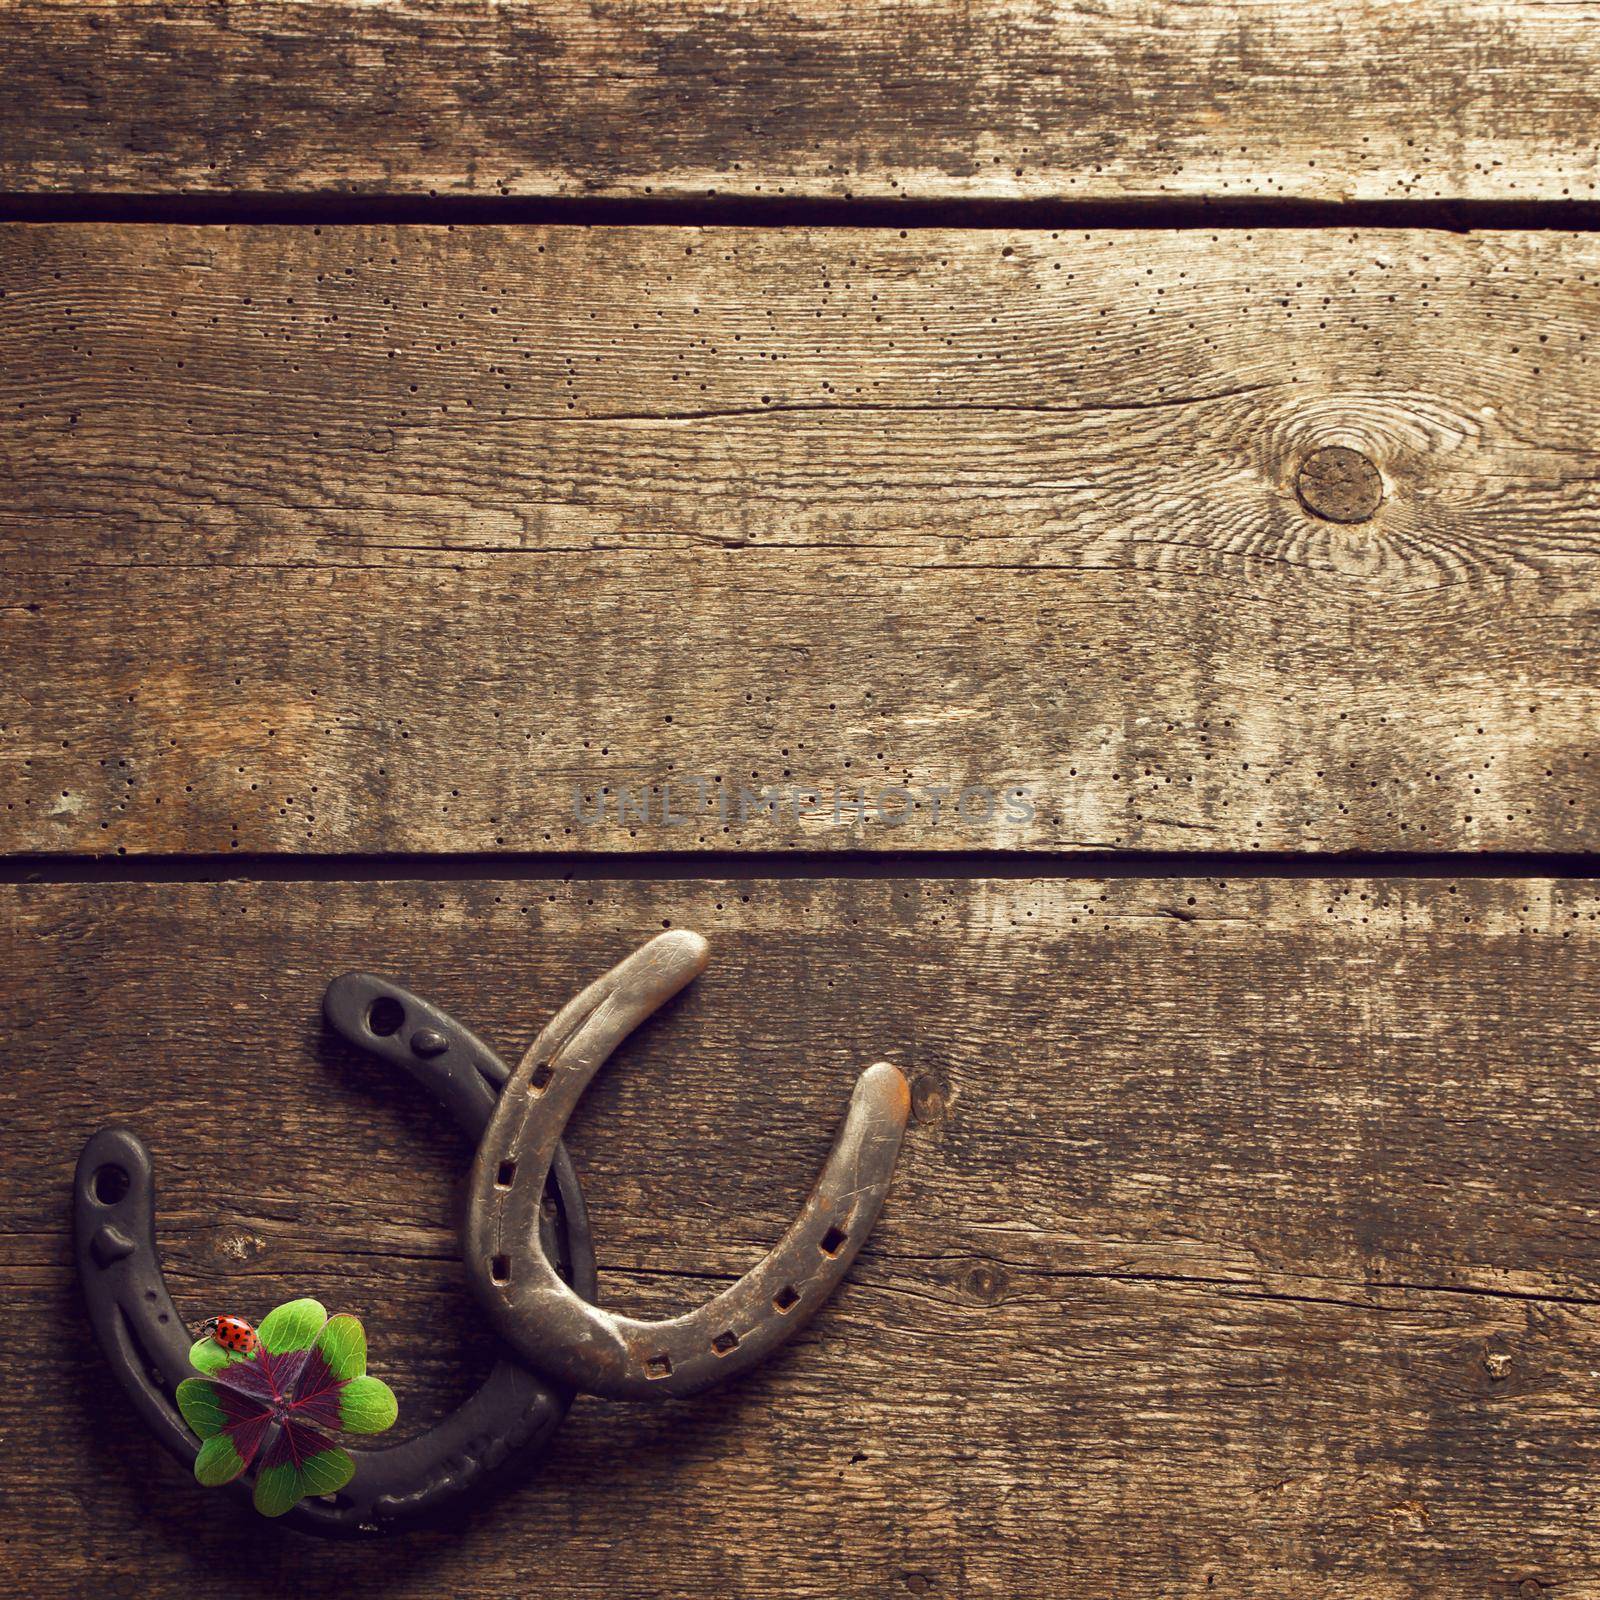 Horseshoe with lucky clover on a wooden background by Taut